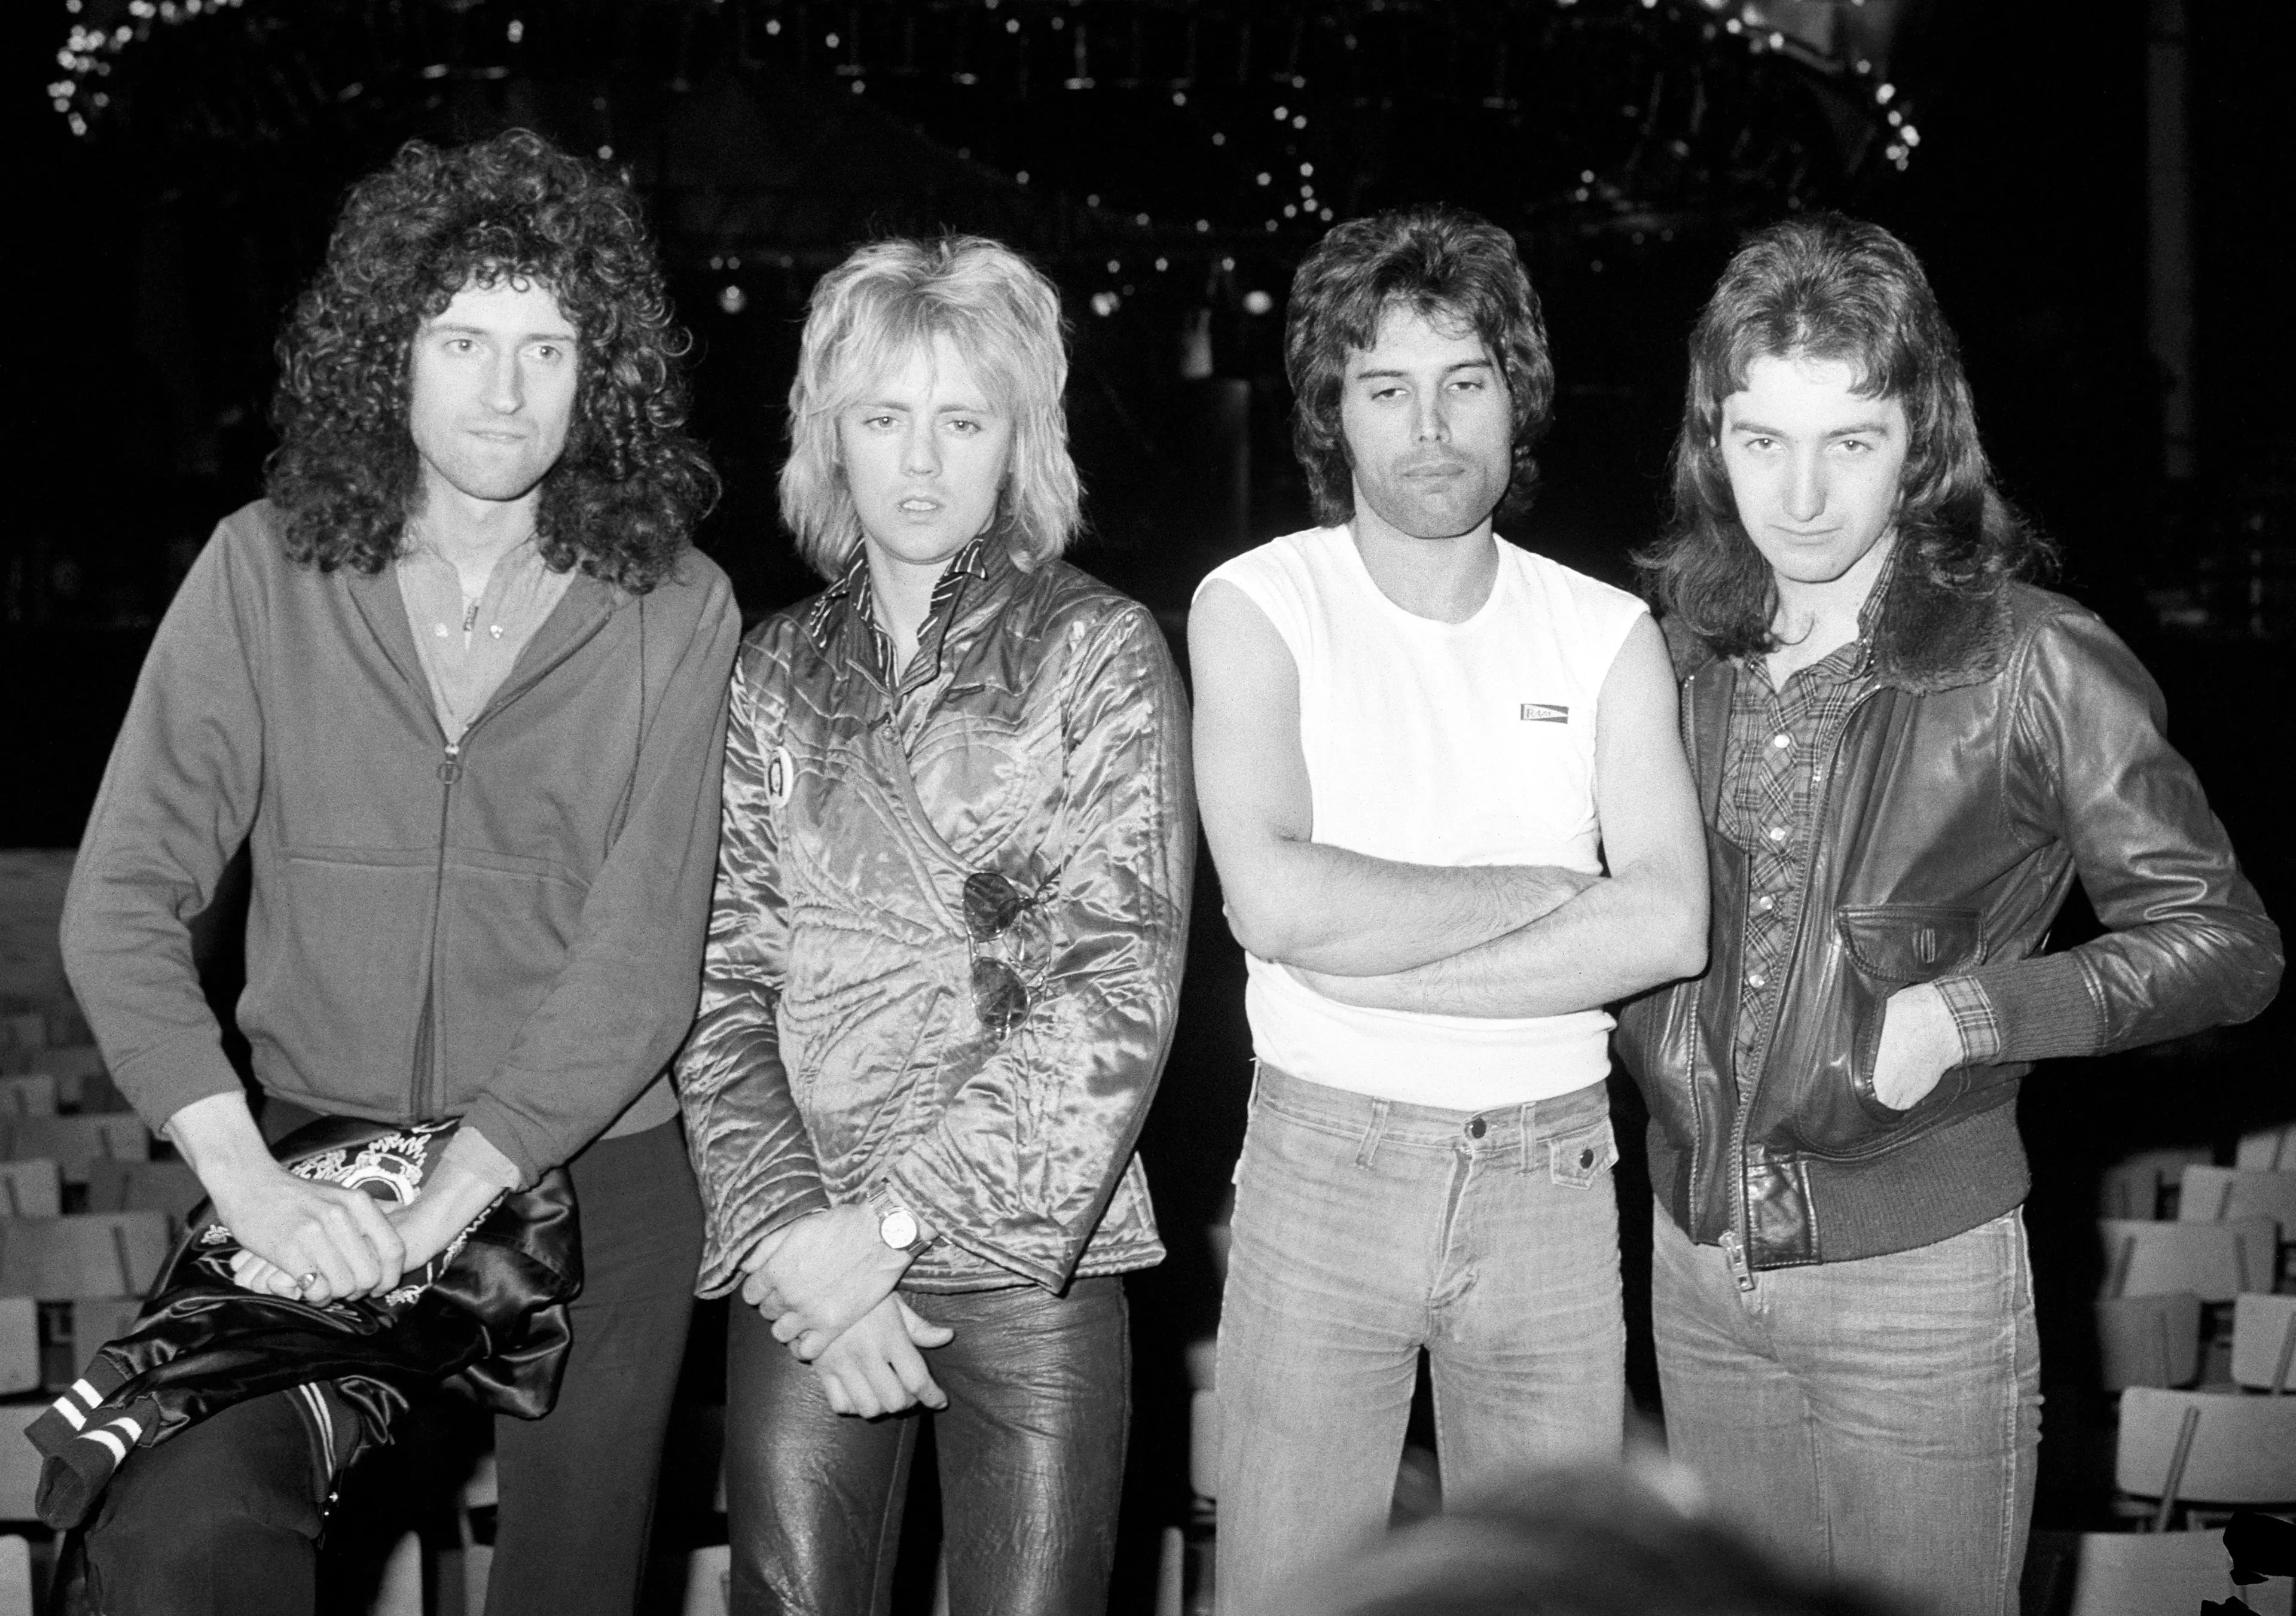 Queen, back in the day.